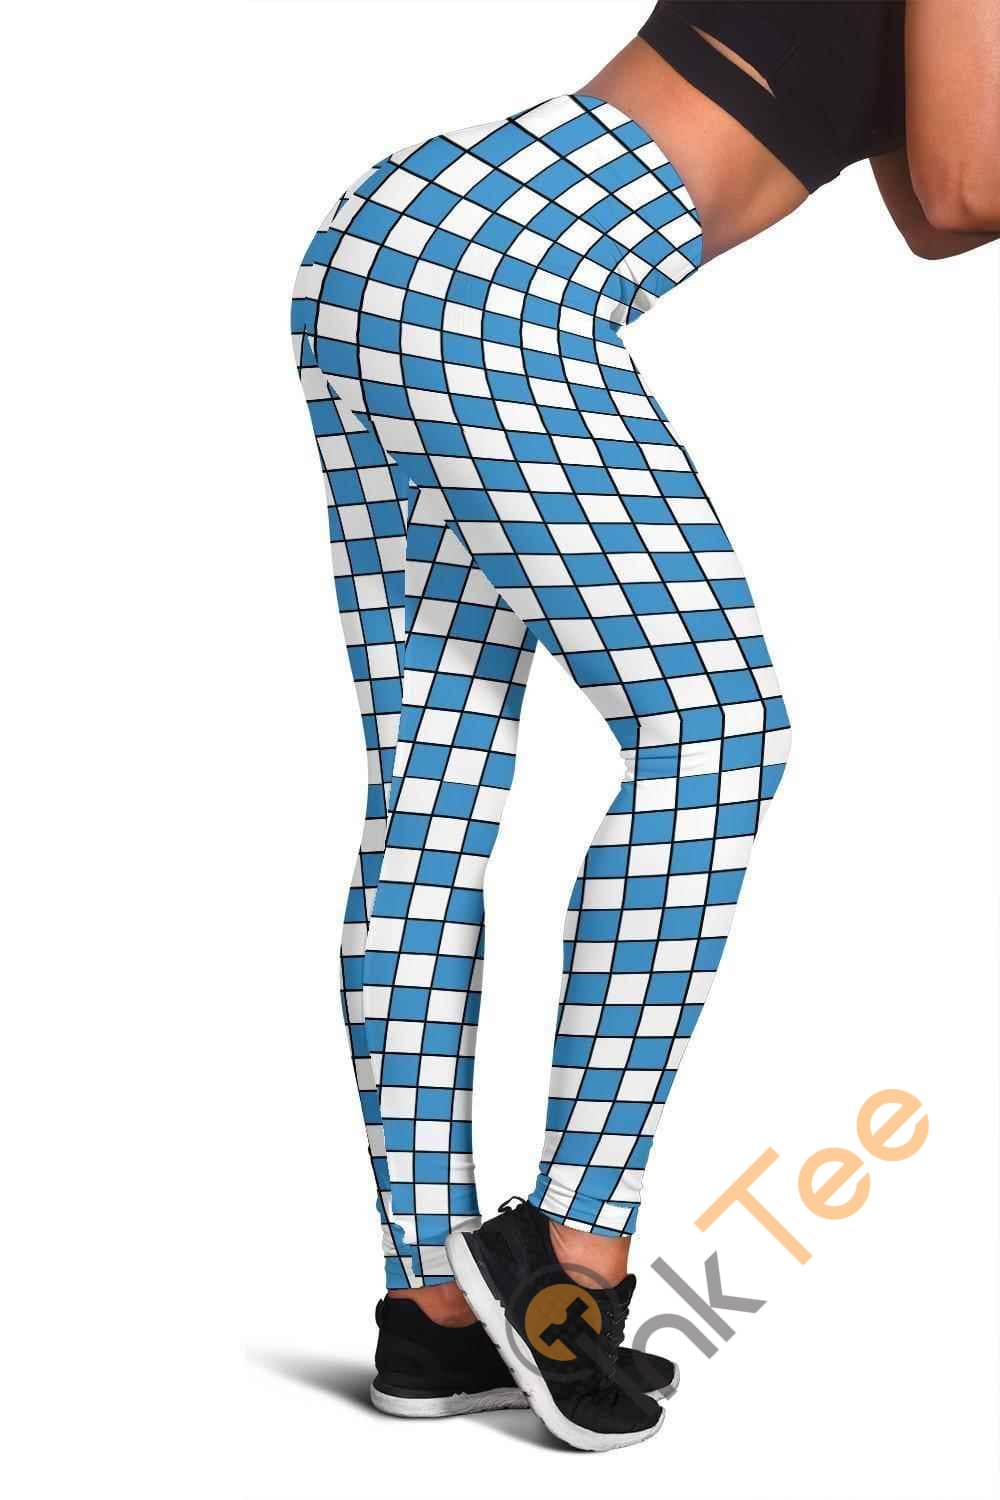 Inktee Store - North Carolina Tar Heels Fan Inspired 3D All Over Print For Yoga Fitness Checkers Women'S Leggings Image